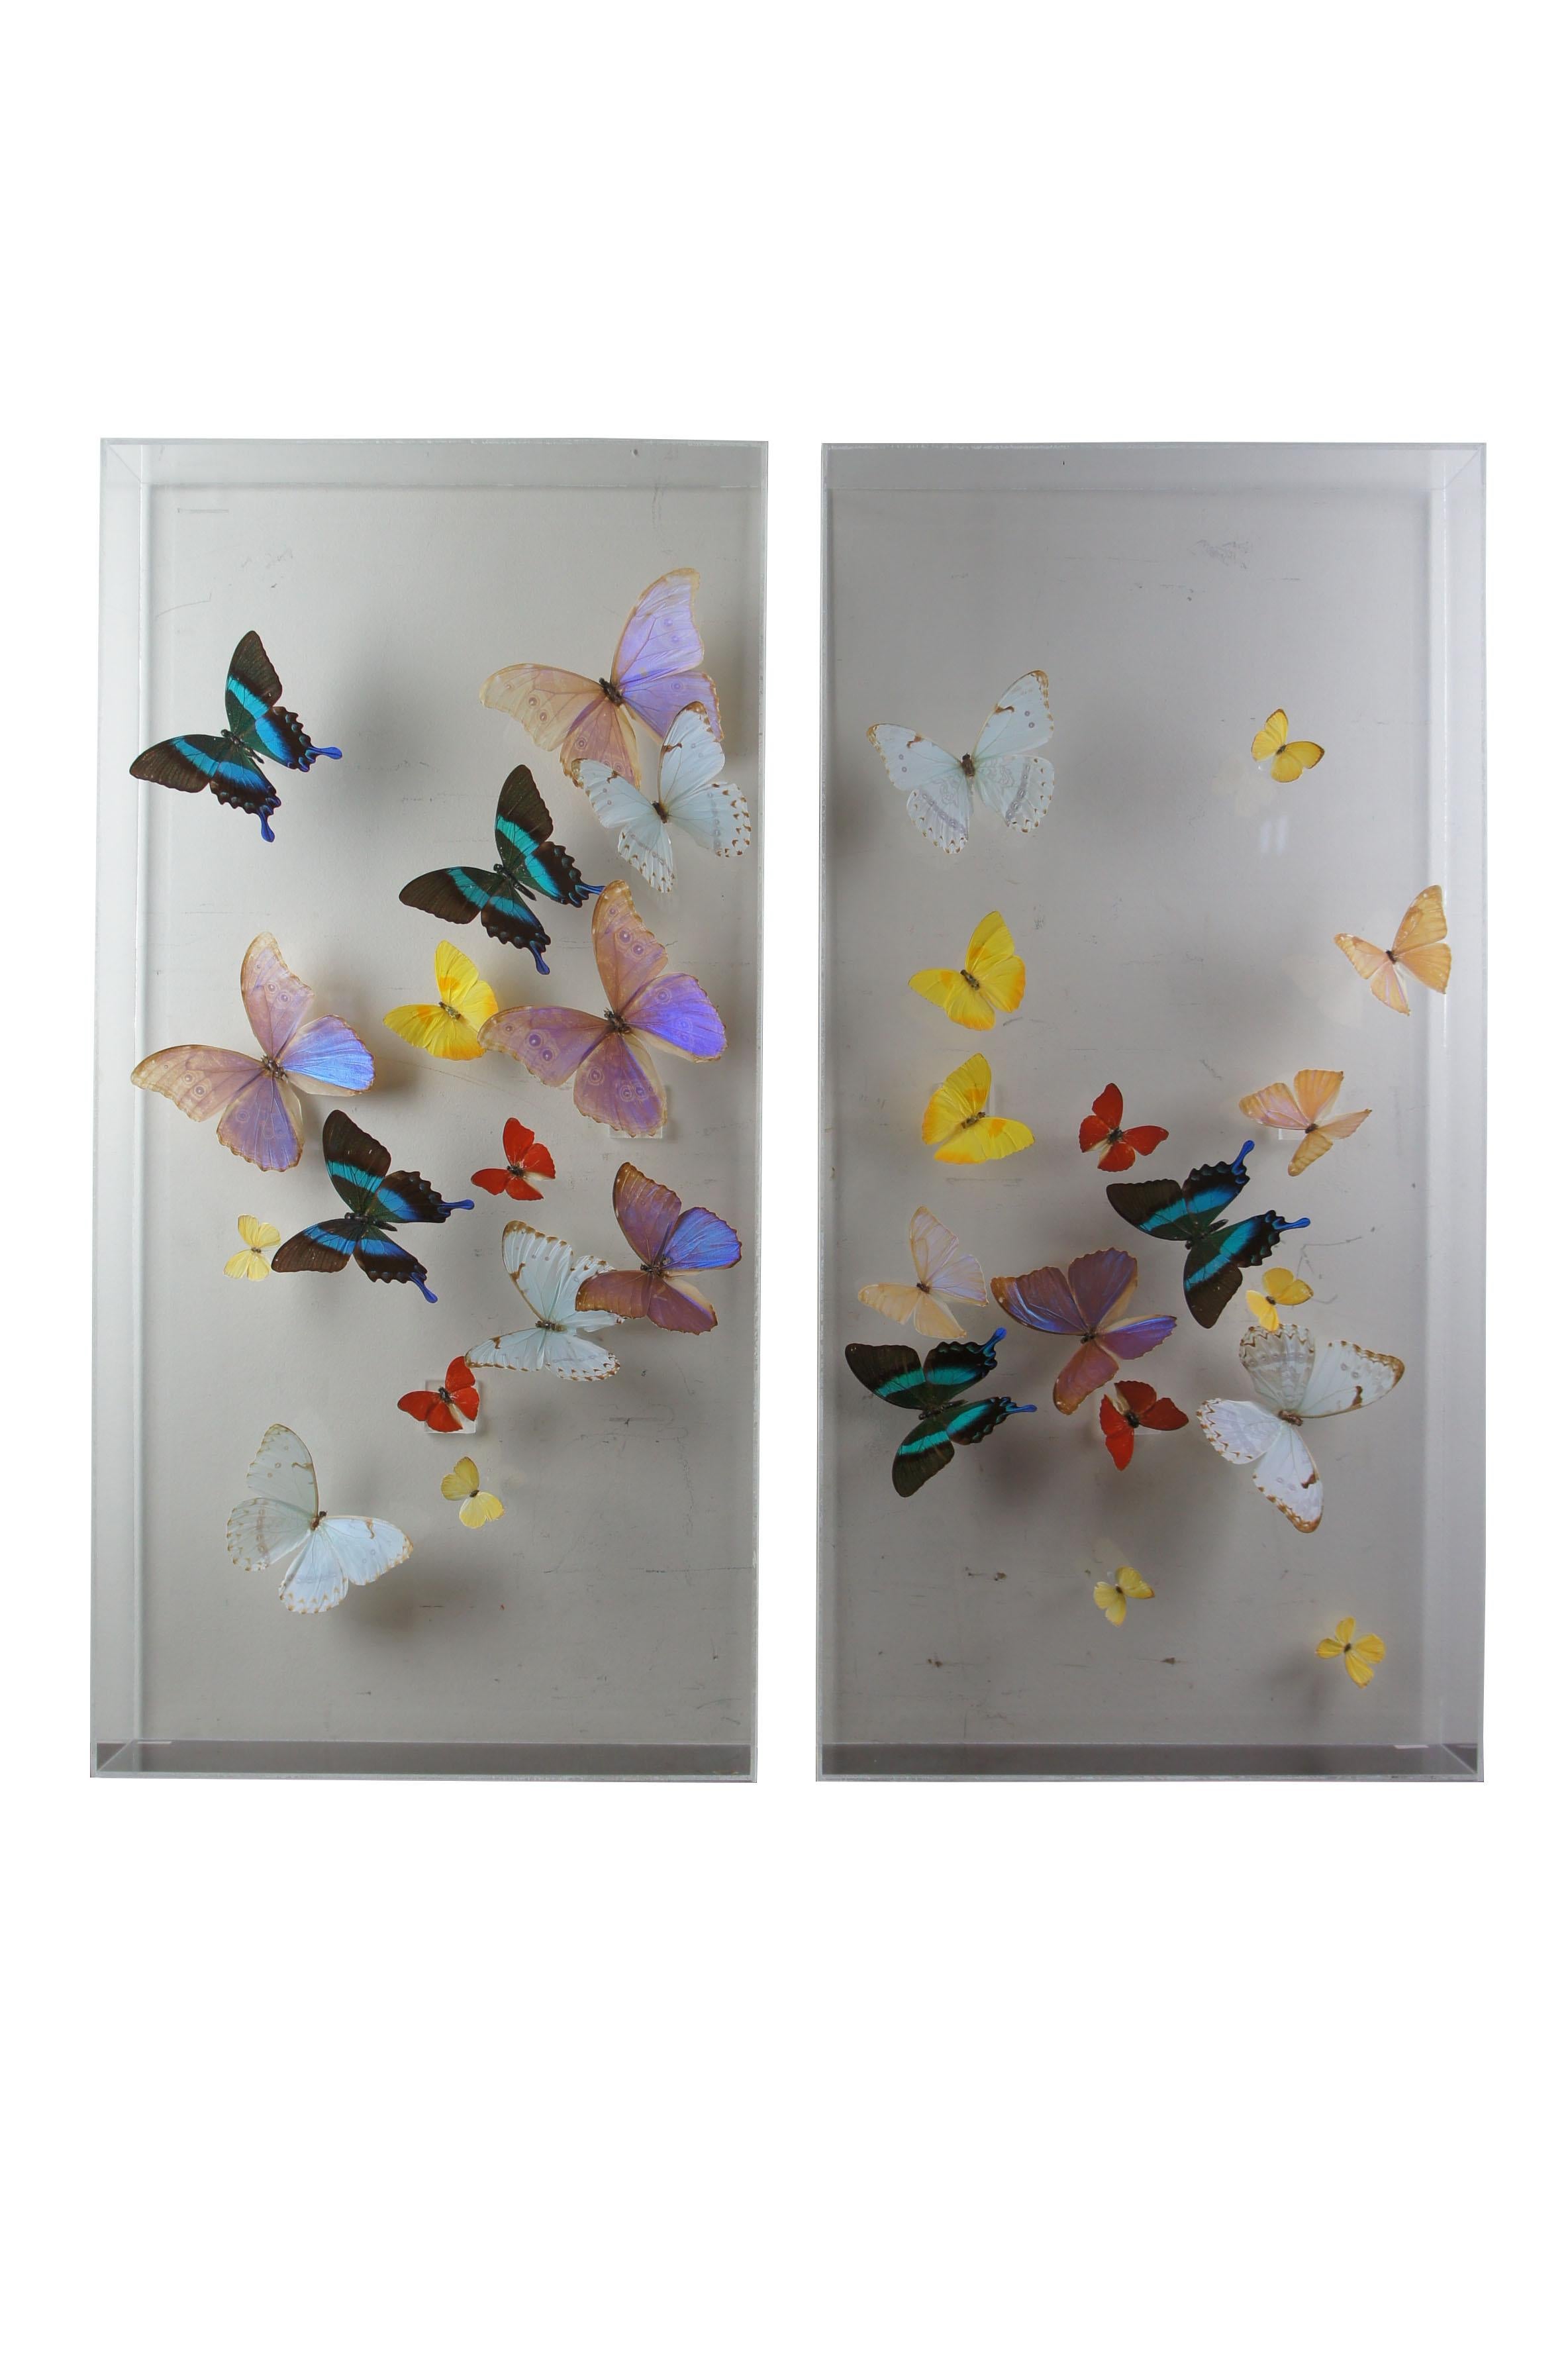 3 large exotic butterfly mounted lucite shadow display boxes taxidermy San Juan

An exquisite set of 3 exotic butterfly shadowboxes from San Juan, Puerto Rico. 
 Beautifully mounted in Lucite displays allowing for perfect display. Purchased in